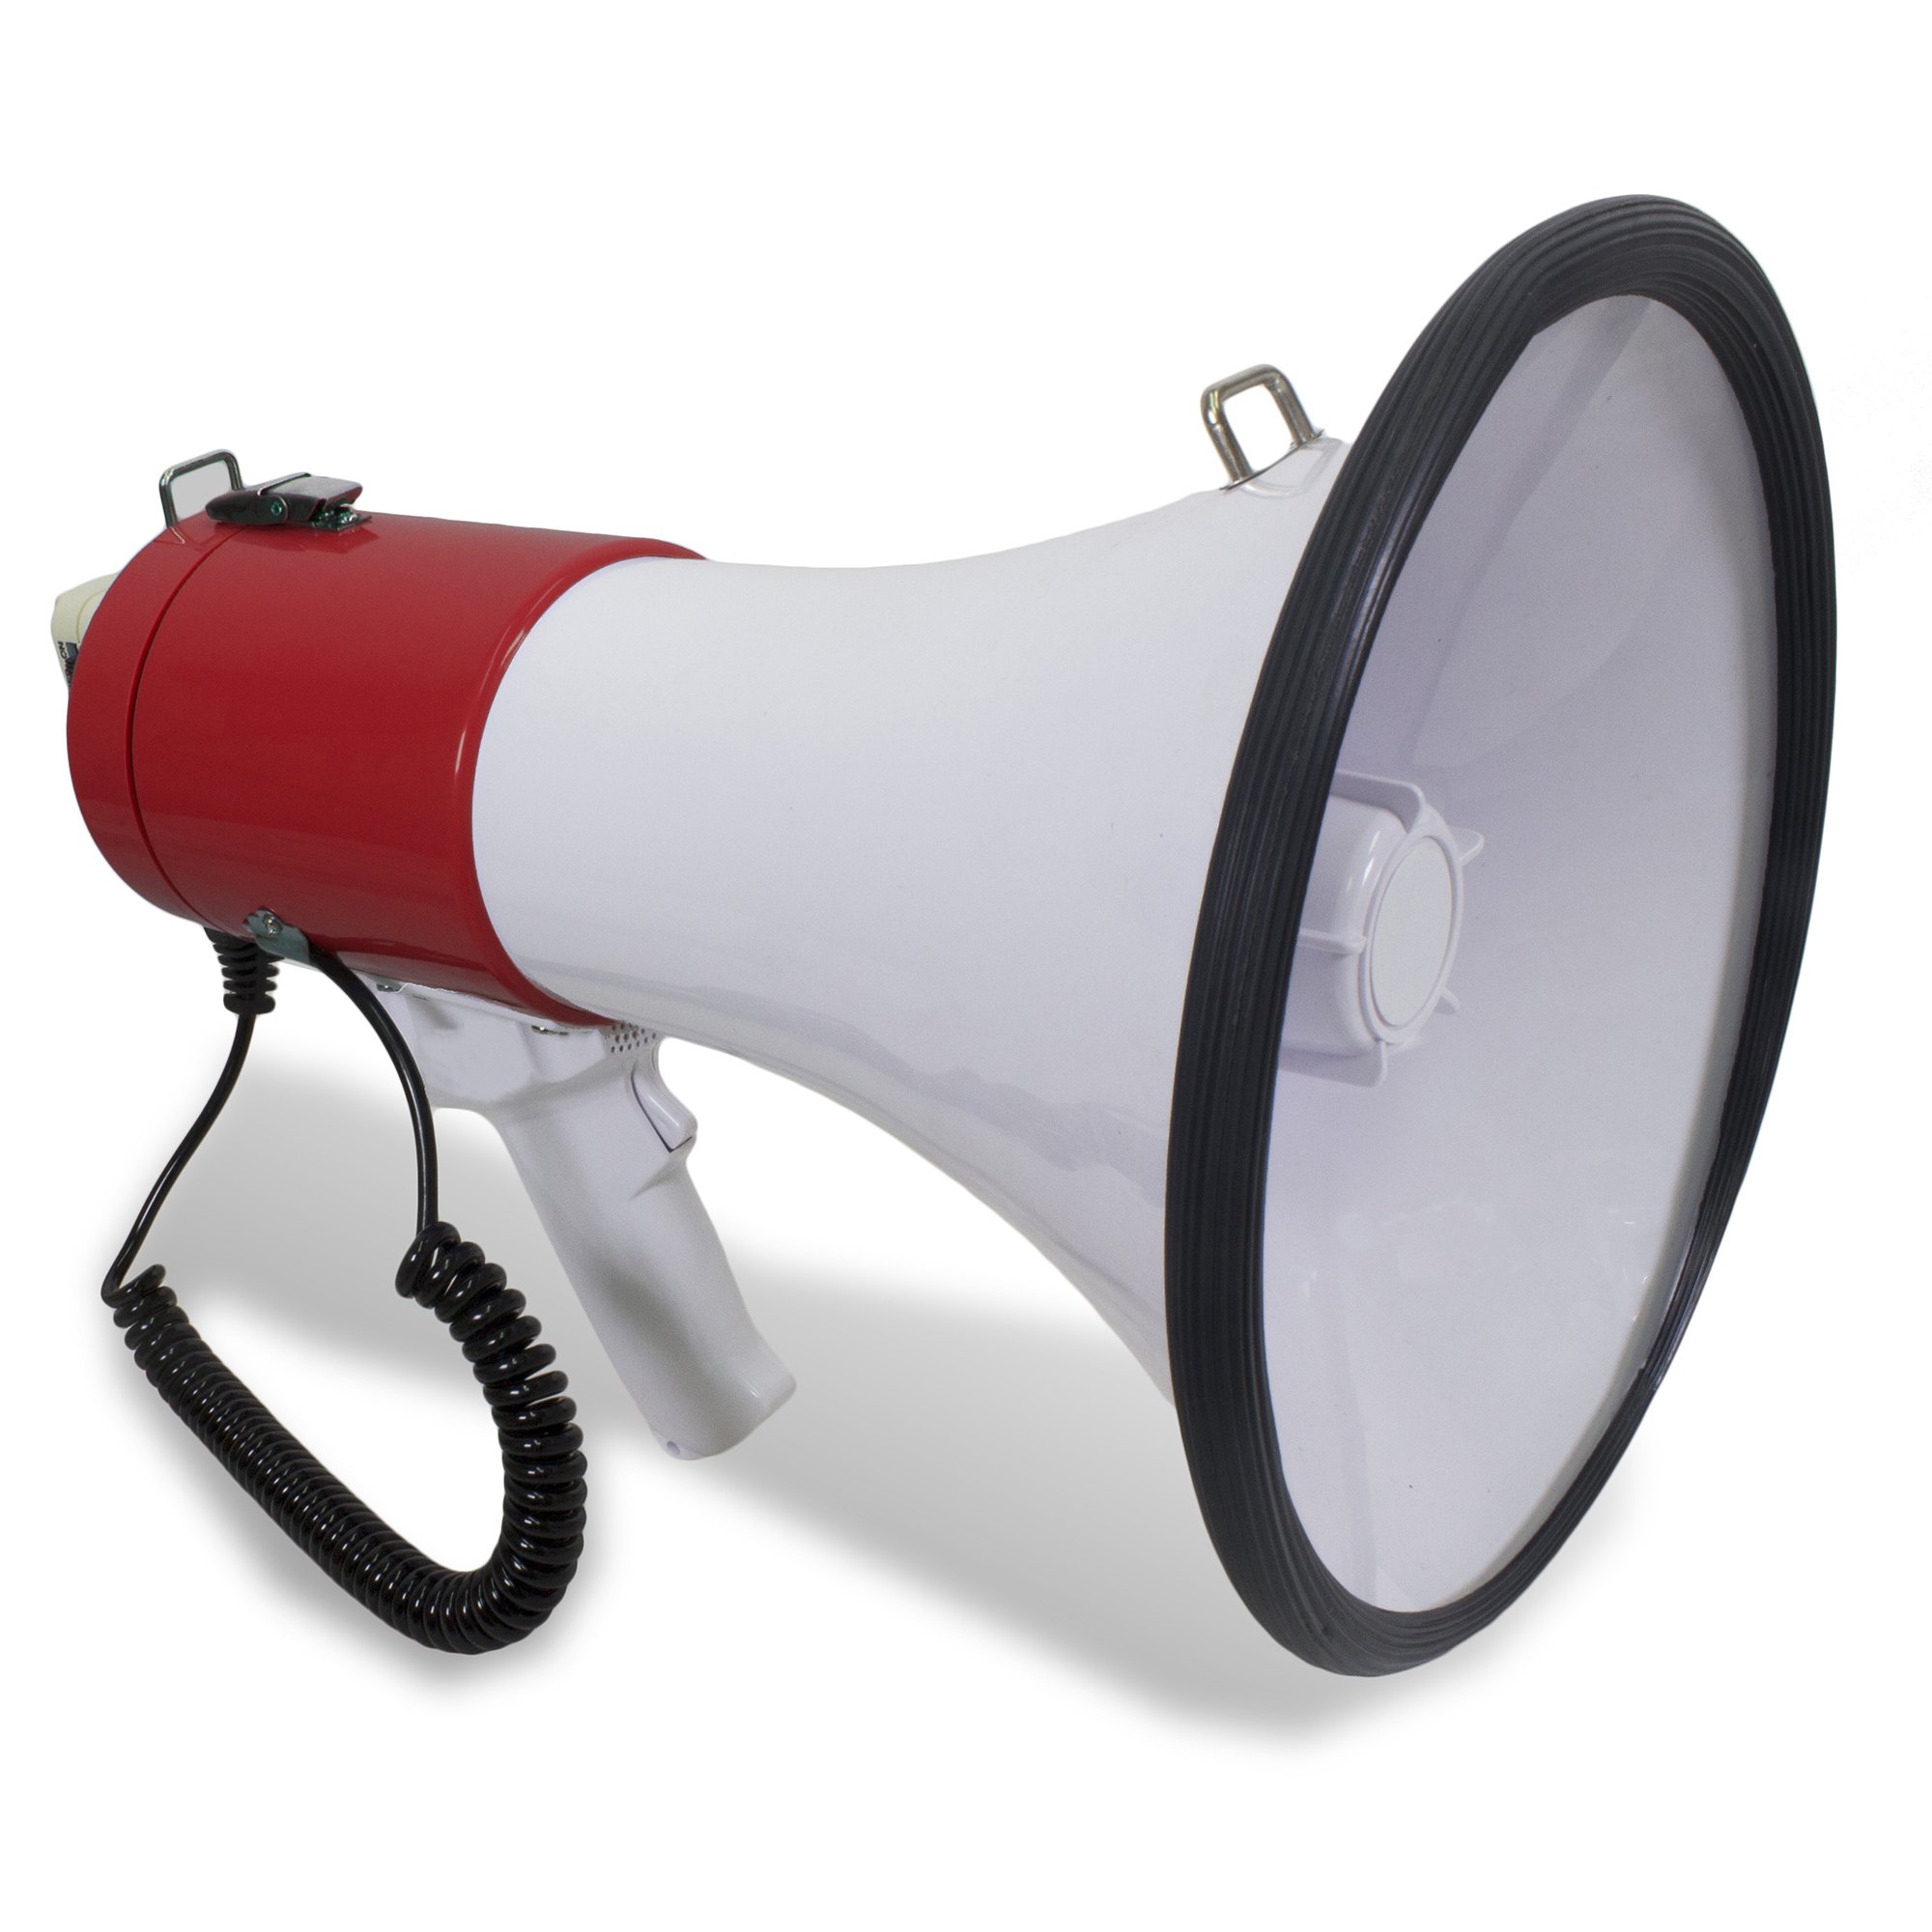 Technical Pro Portable 40 Watts, 800M-1000M Range Megaphone Bullhorn With Strap, Siren, Volume Control For Trainers, Football Coaches (Red)